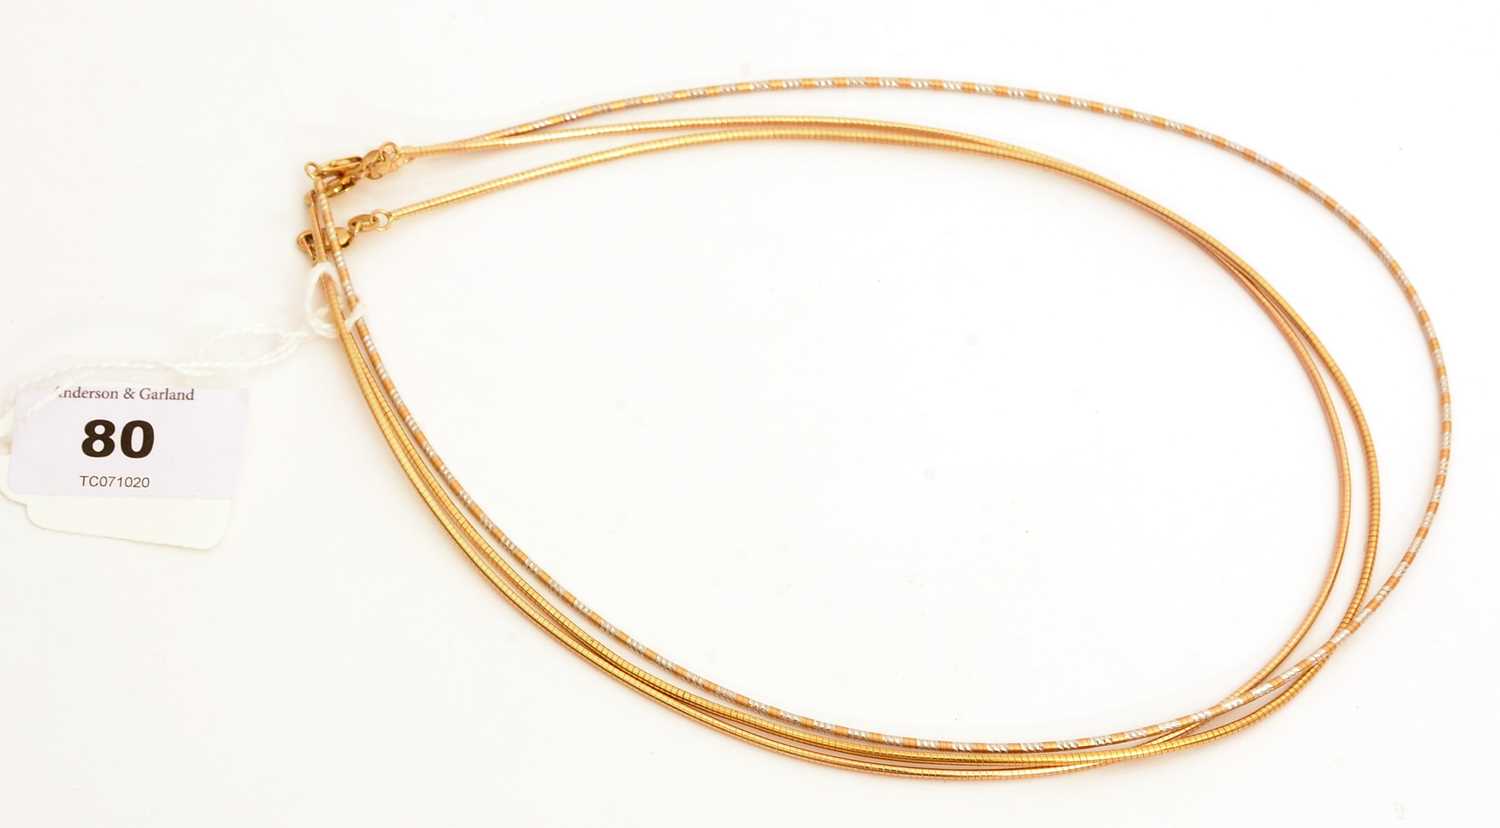 Lot 80 - Three 9ct yellow gold necklaces